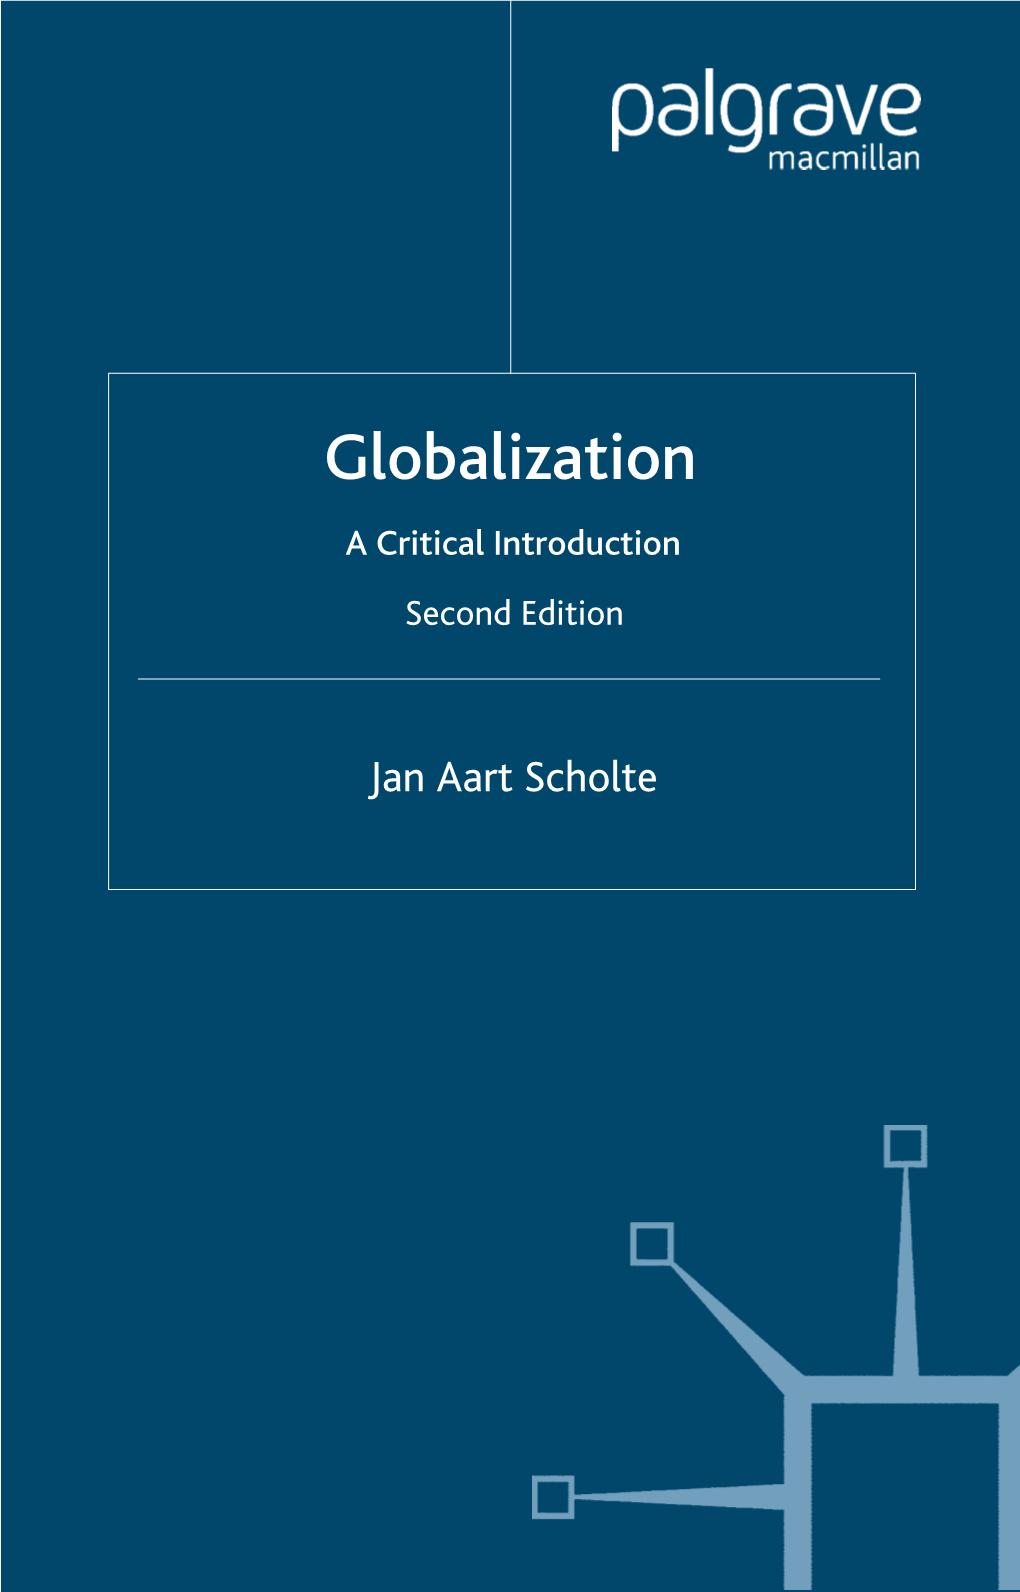 Globalization: a Critical Introduction, Second Edition